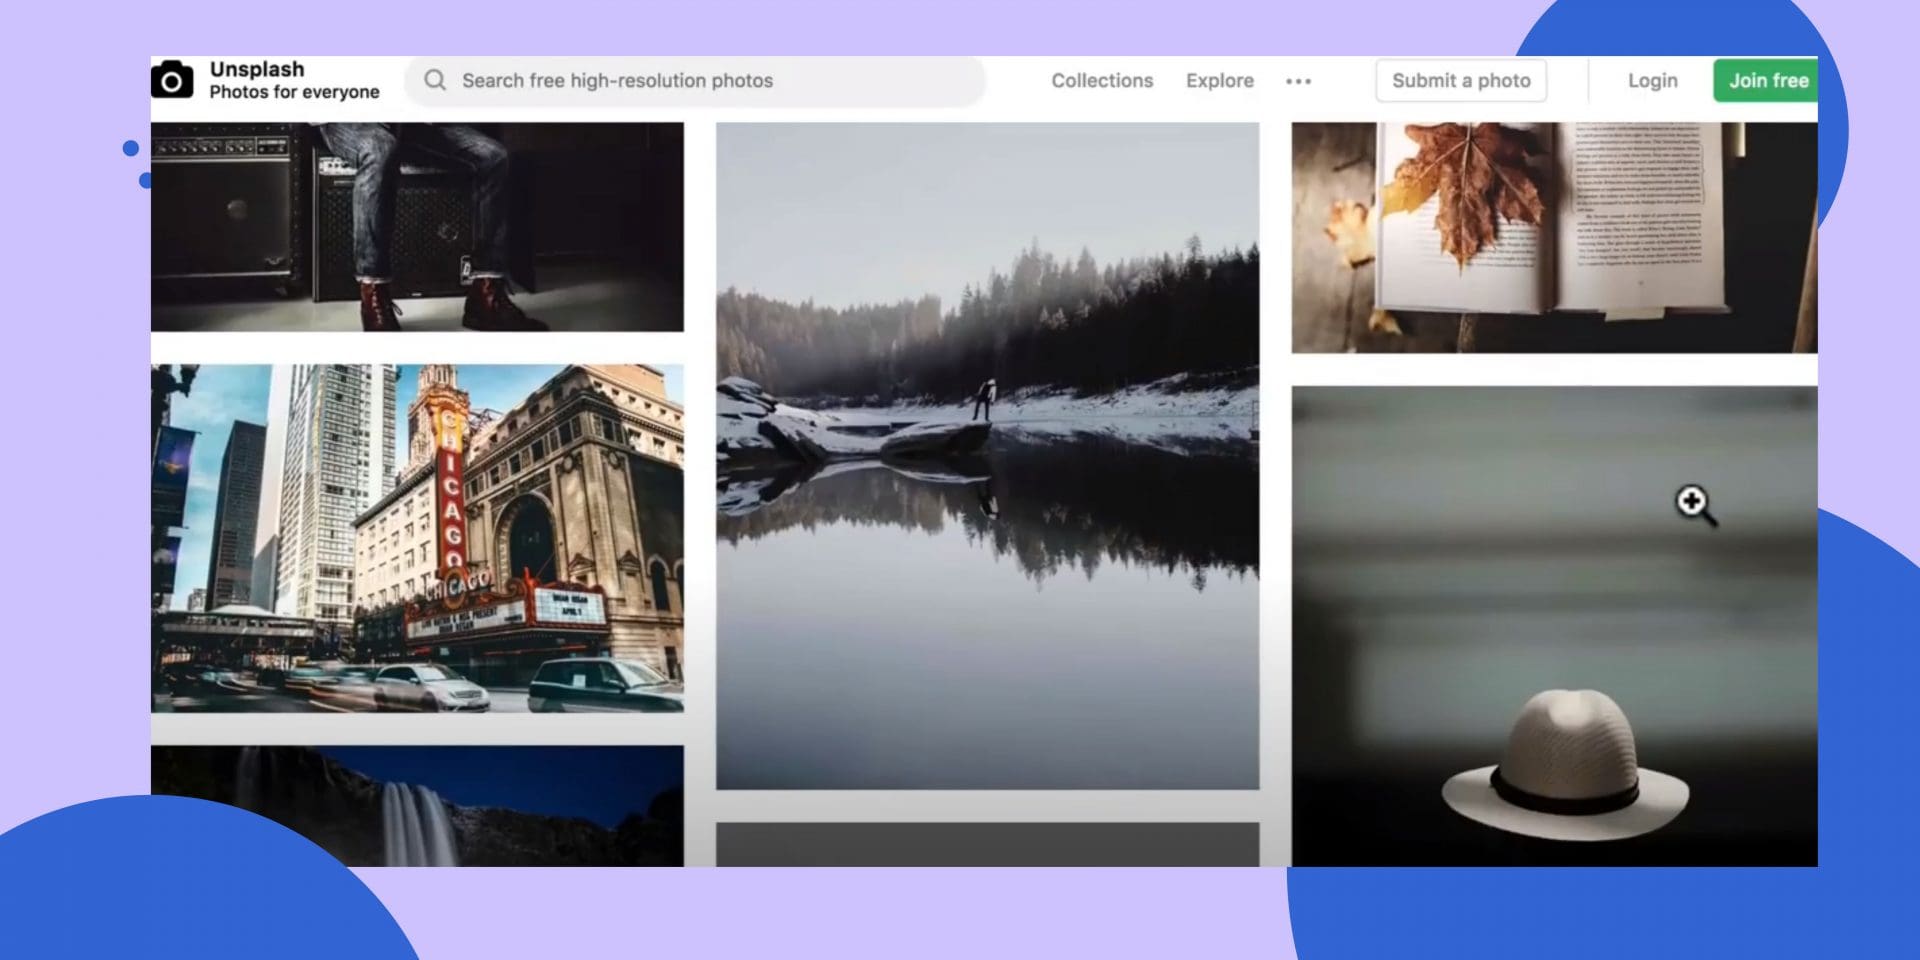 #10 Use Images - Blogging Best Practices